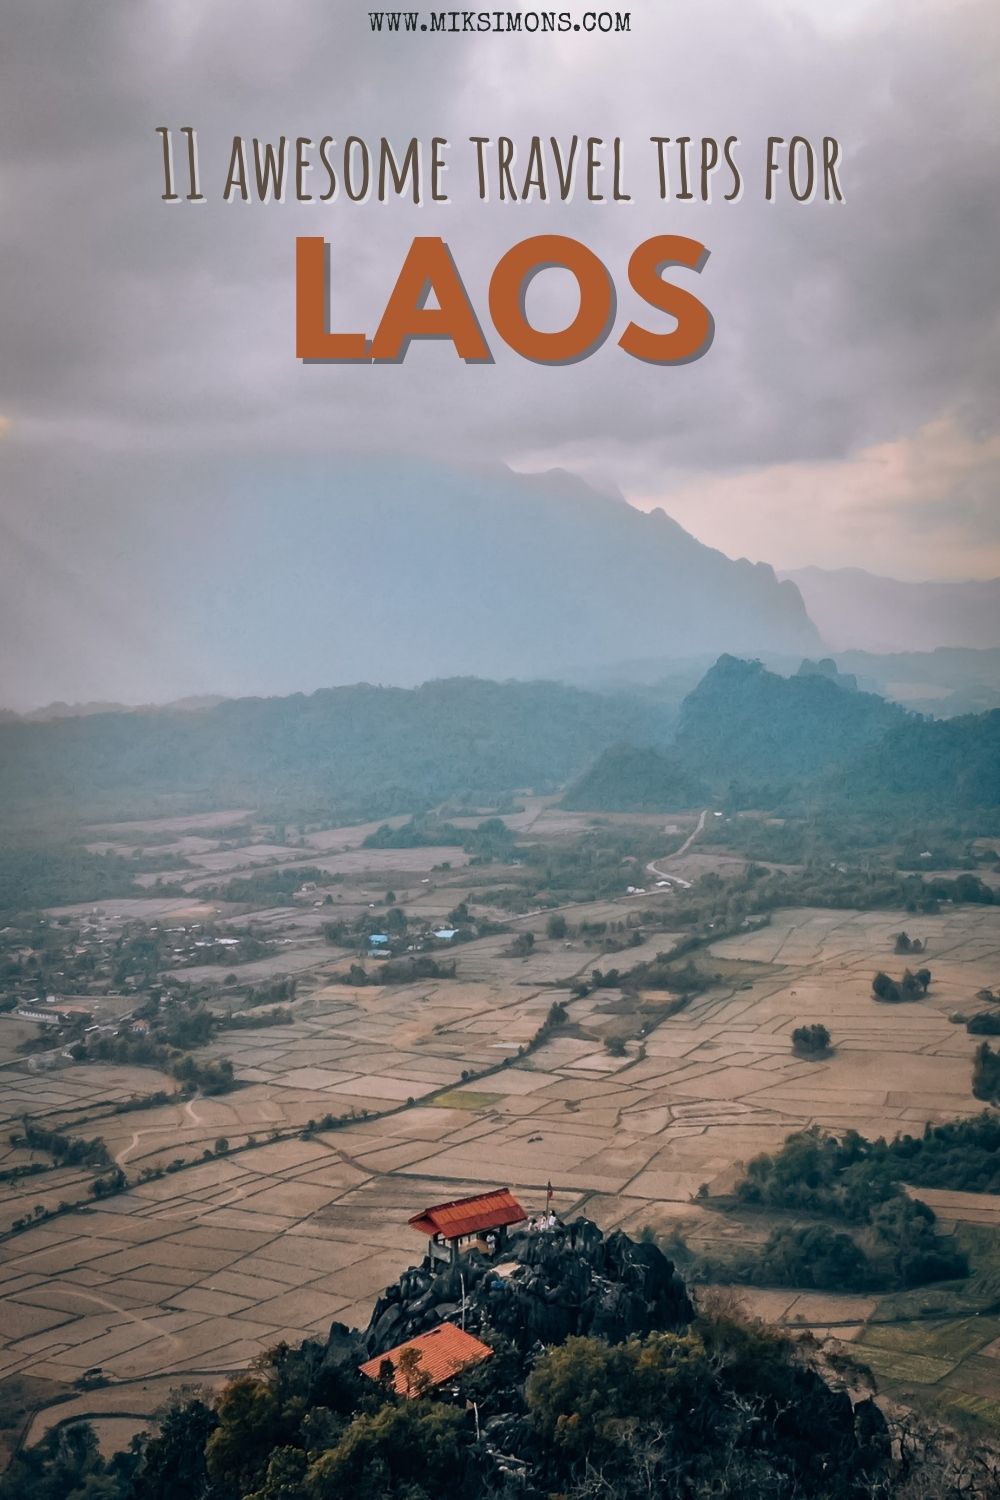 LAOS TRAVEL TIPS: 11 AMAZING THINGS TO KNOW FOR YOUR LAOS ITINERARY